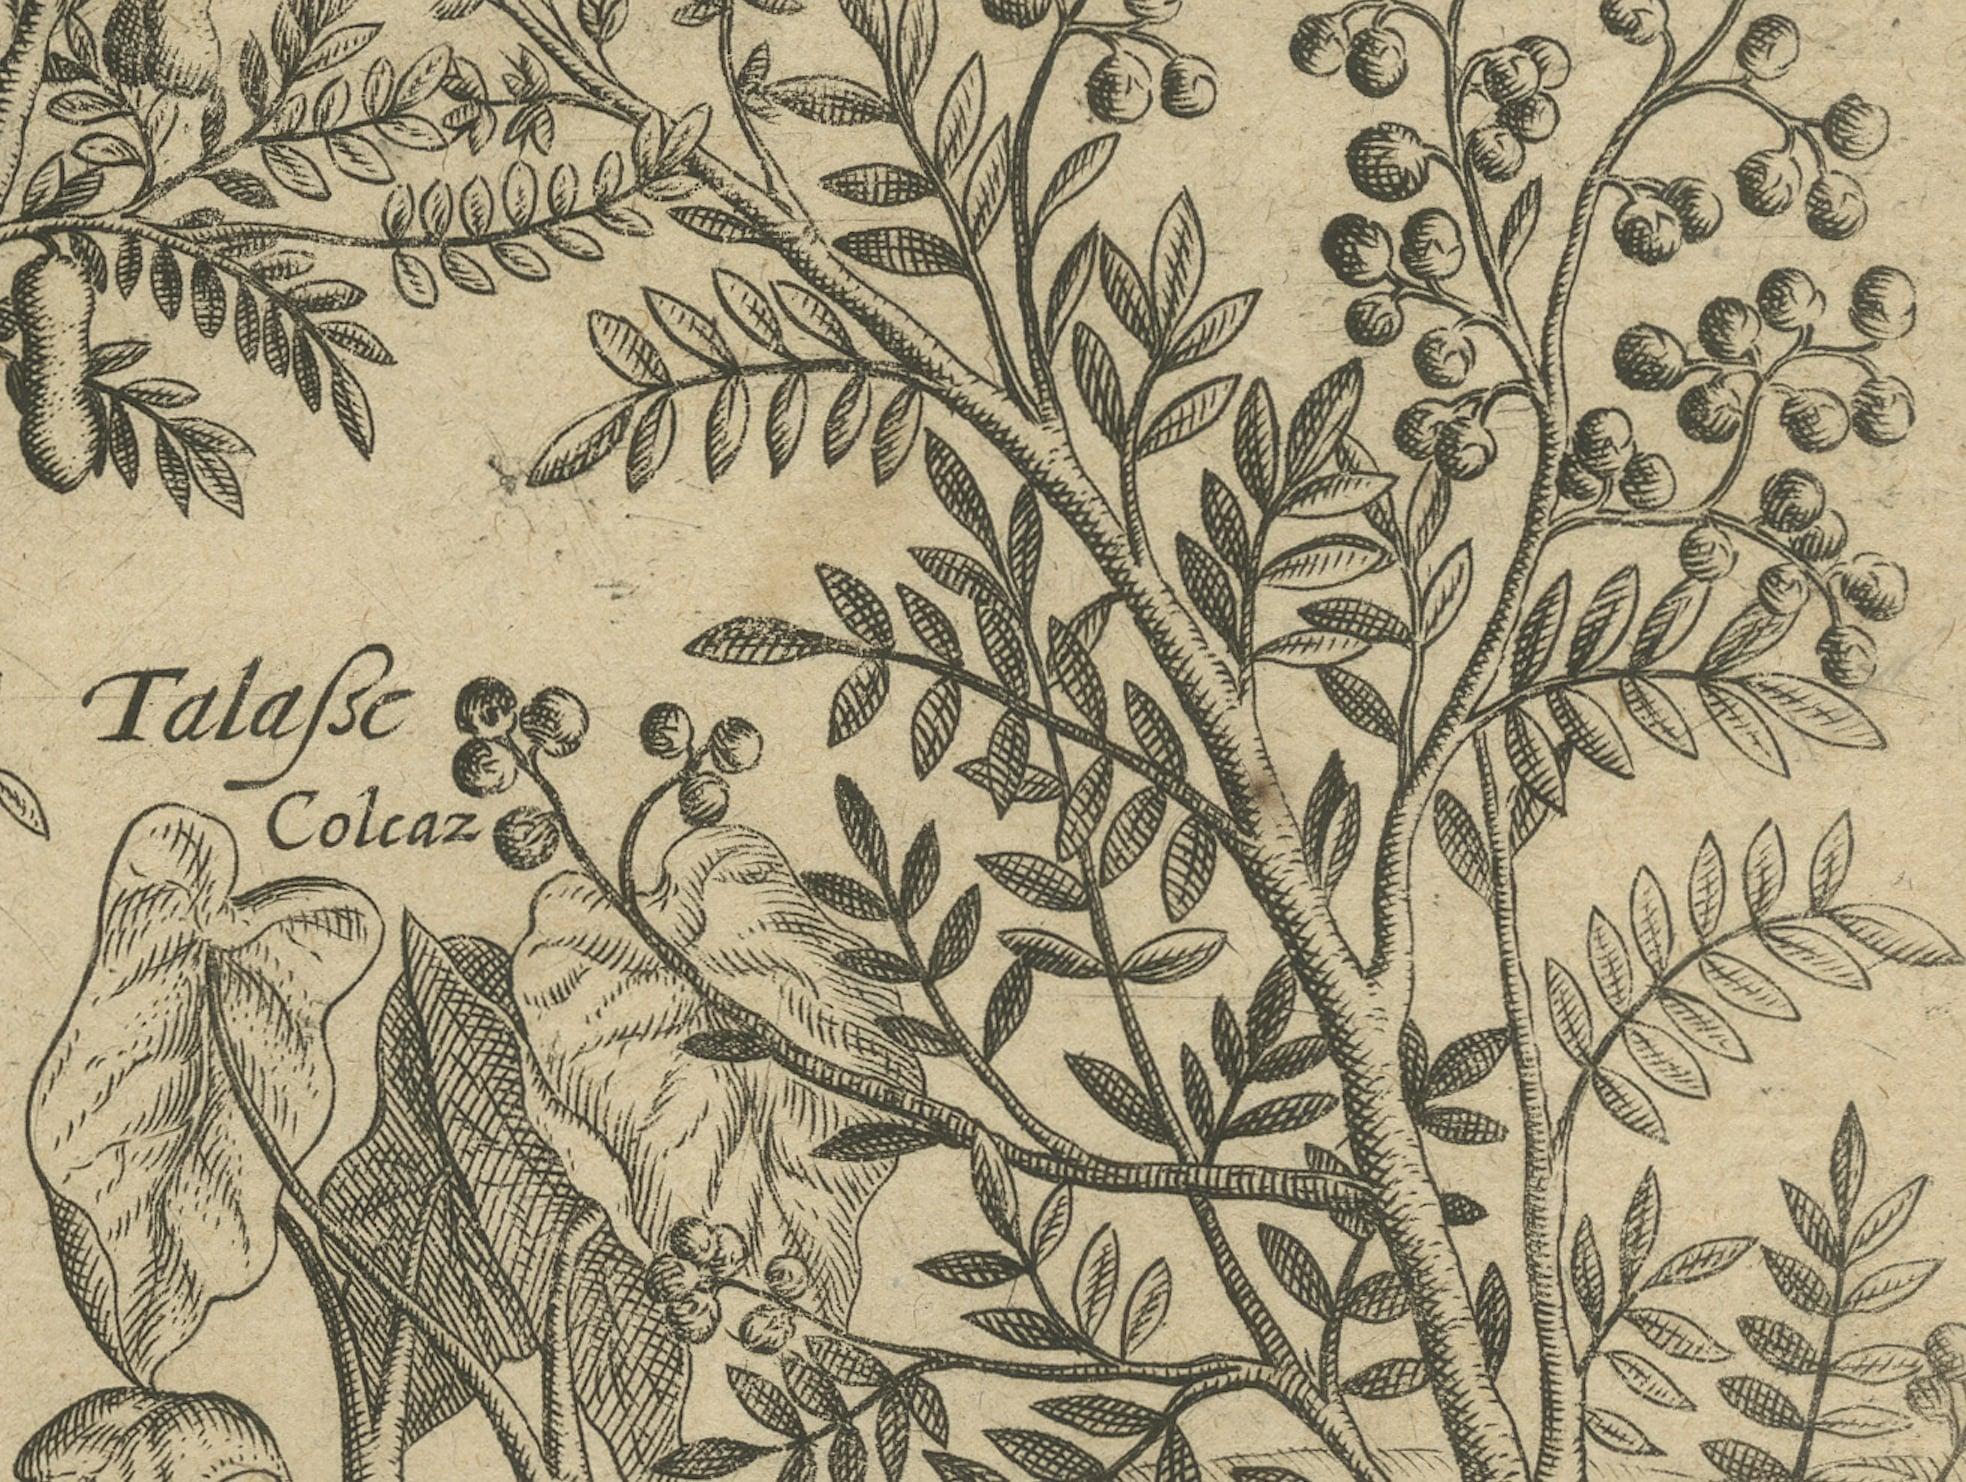 17th Century Verdant Wonders: Exotic Trees and Spices of India in De Bry's 1601 Illustration For Sale